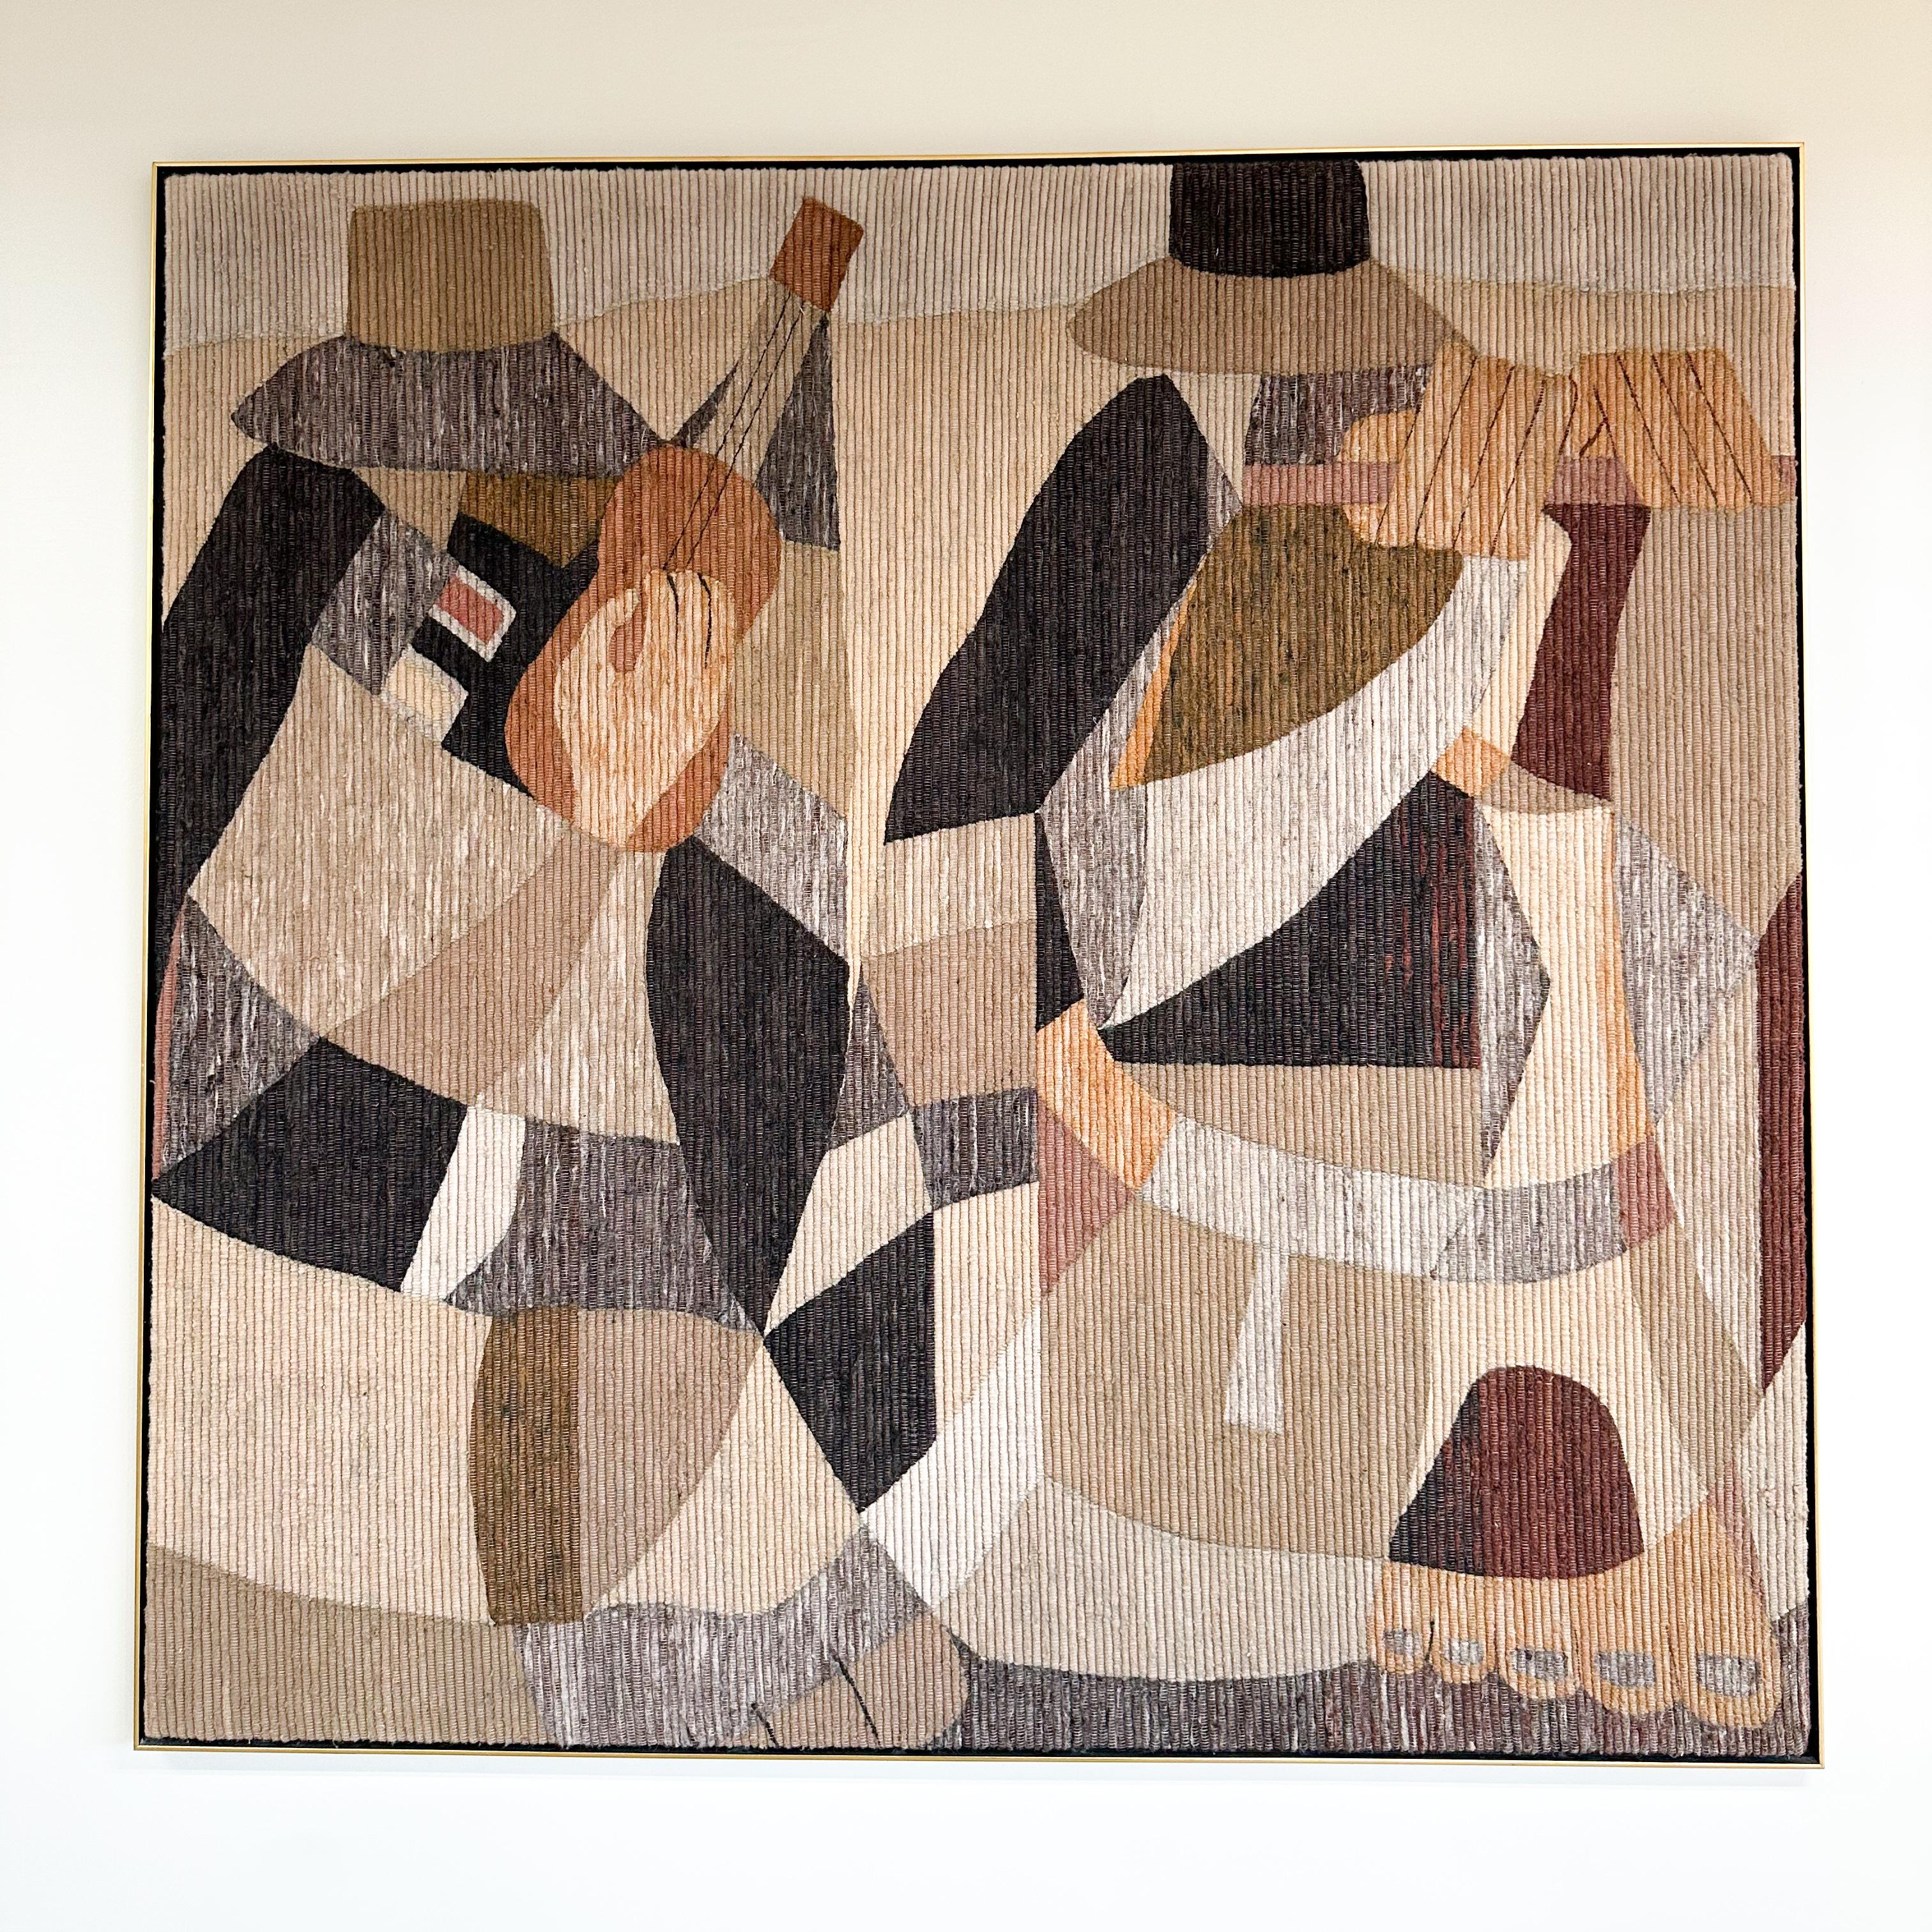 Vintage Cubist Musician Wool Woven Tapestry

This extra-large vintage Cubist musician tapestry is a stunning piece handcrafted with Peruvian wool. It's a unique creation influenced by the style of V. Yuri, though it lacks a signature. This